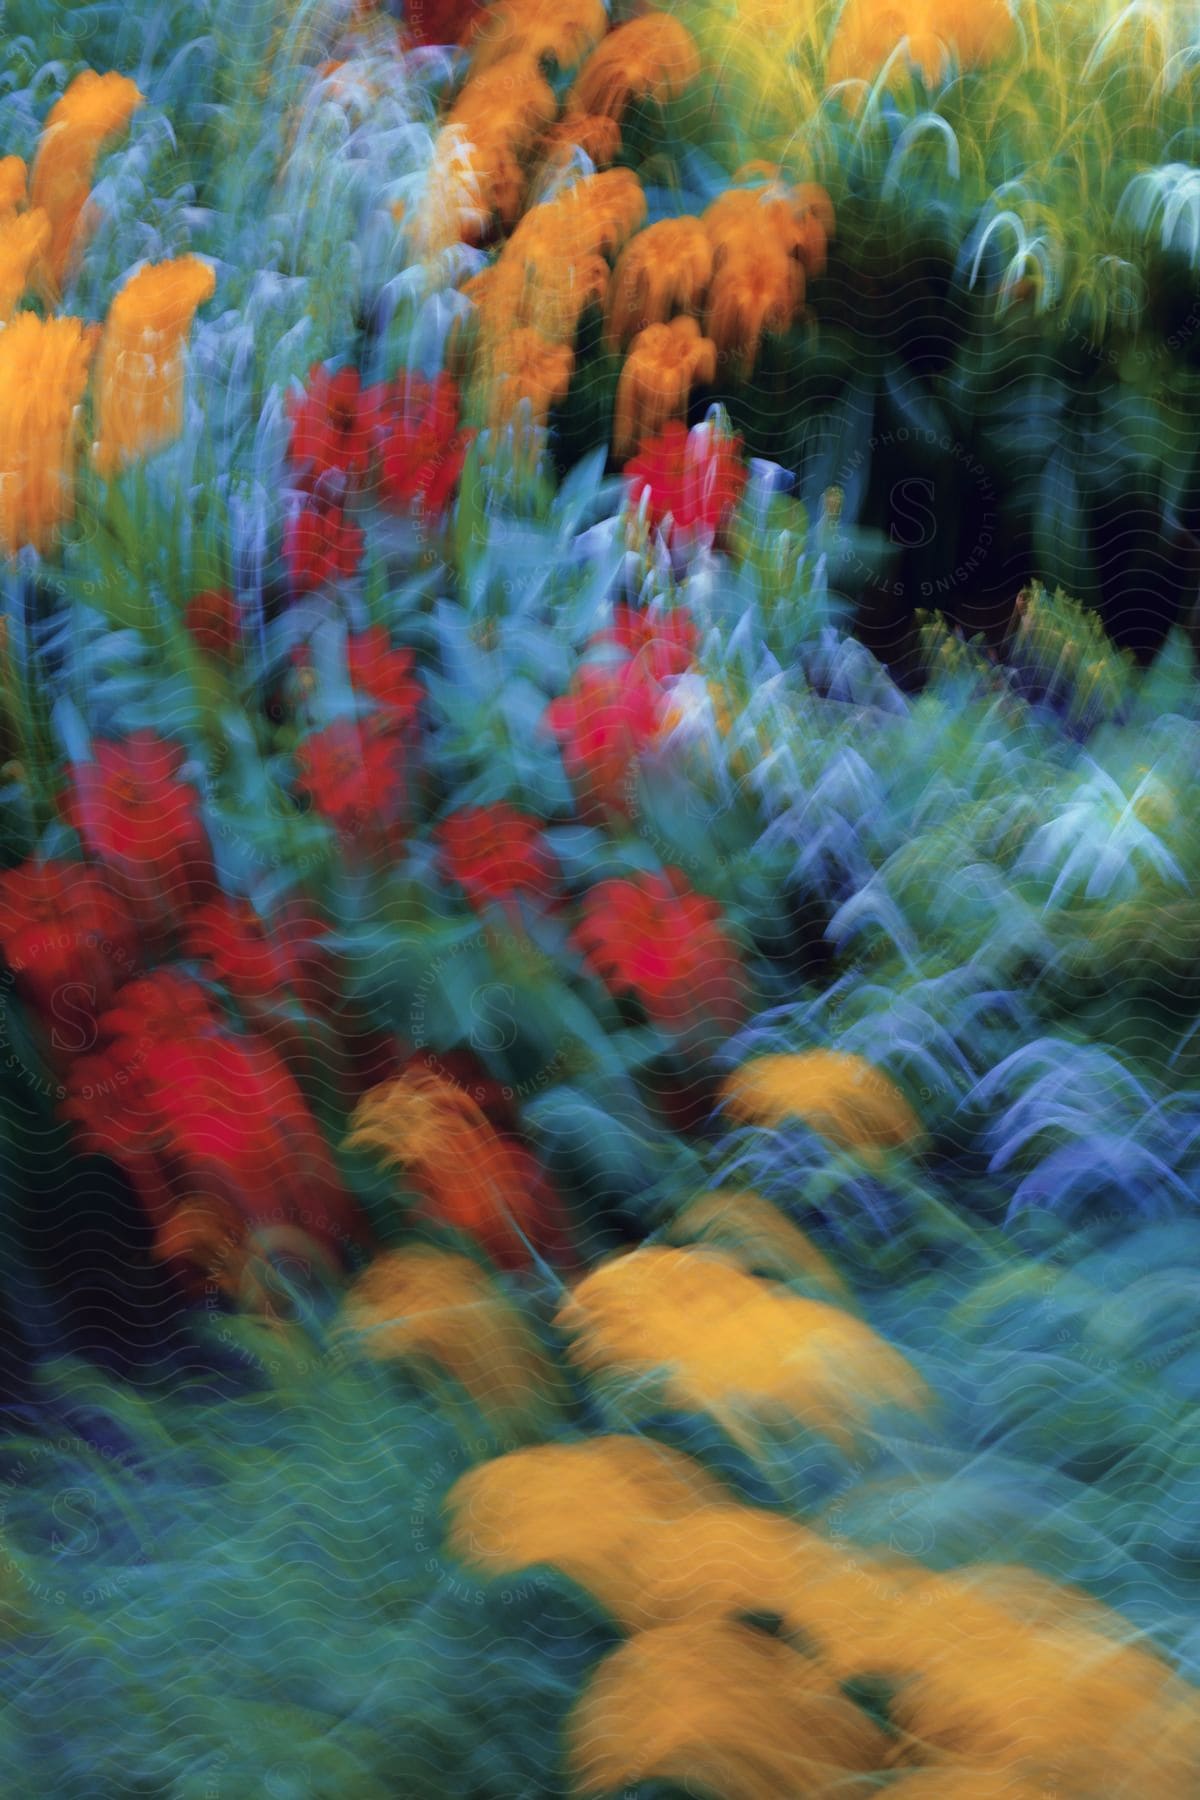 A field of colorful flowers in a blur of motion.